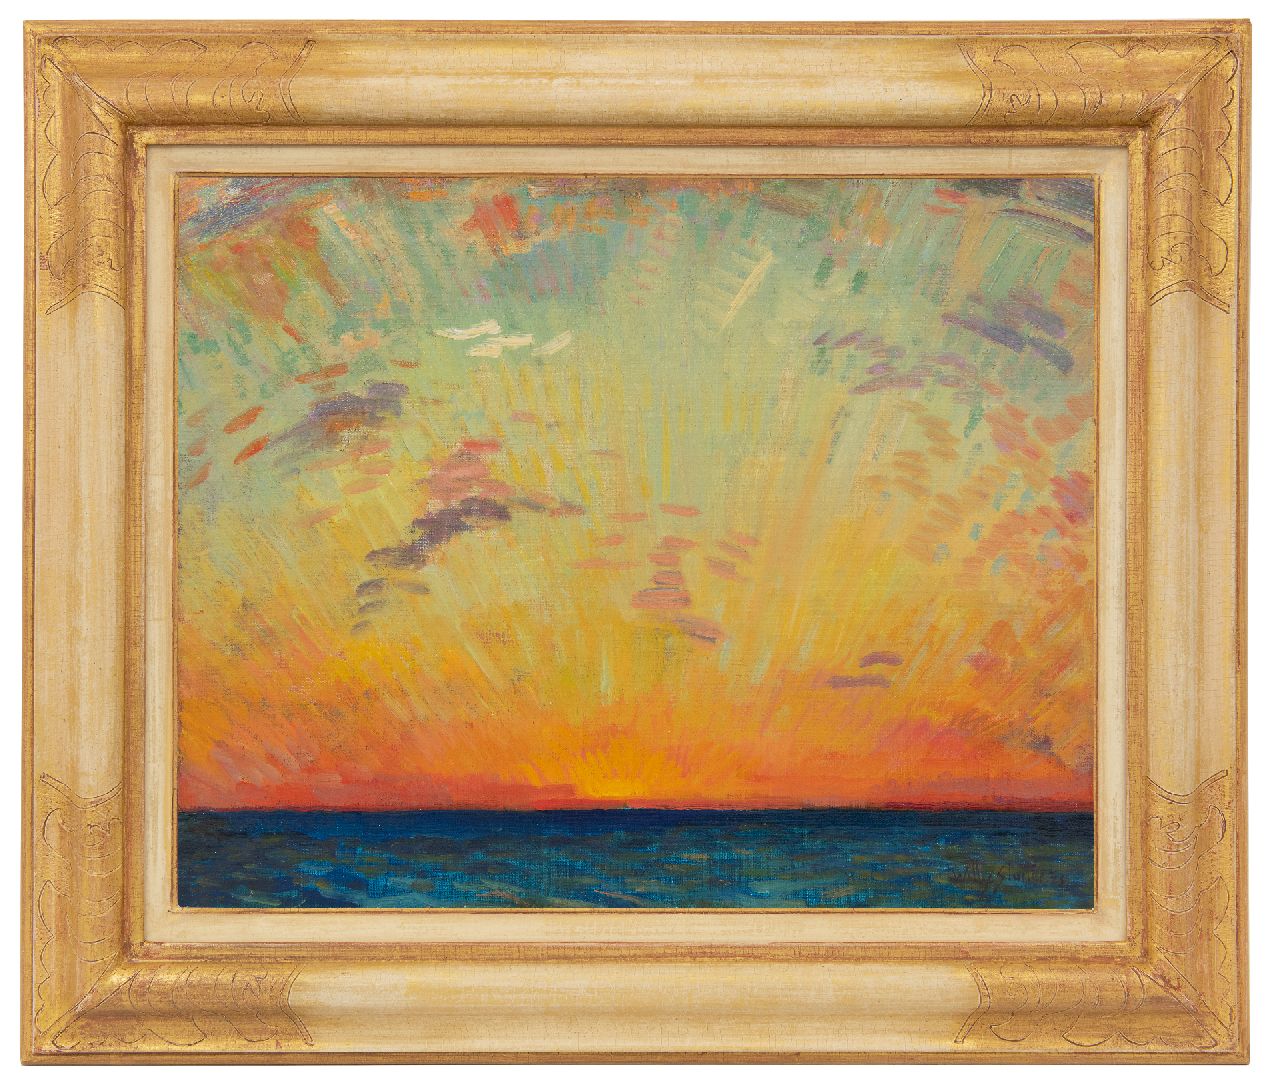 Sluiter J.W.  | Jan Willem 'Willy' Sluiter, Sunset in the Indian Ocean, oil on canvas 40.2 x 50.2 cm, signed l.r. and dated '23